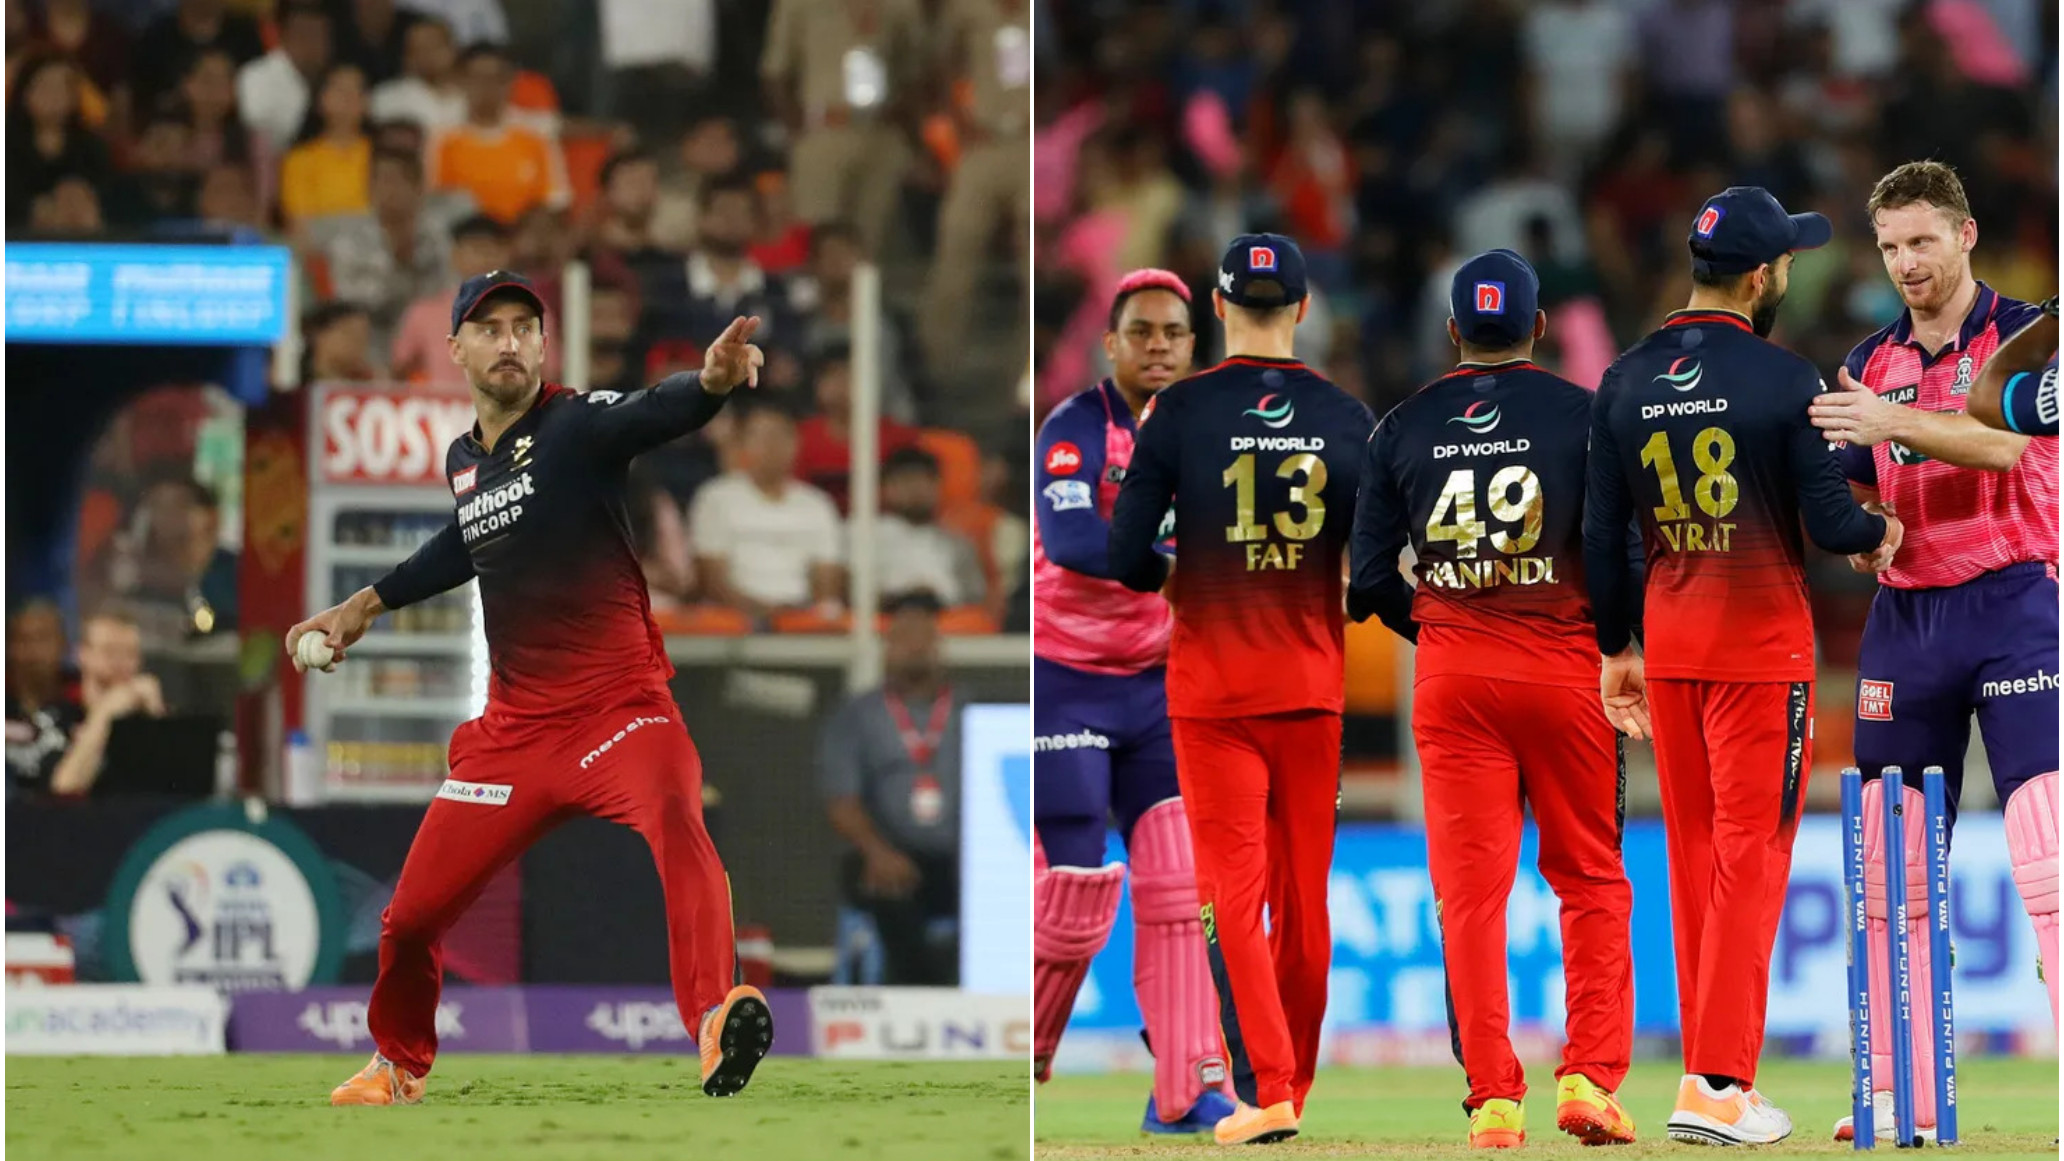 IPL 2022: “I stand proud of the team”, Faf du Plessis after RCB’s loss in Qualifier 2